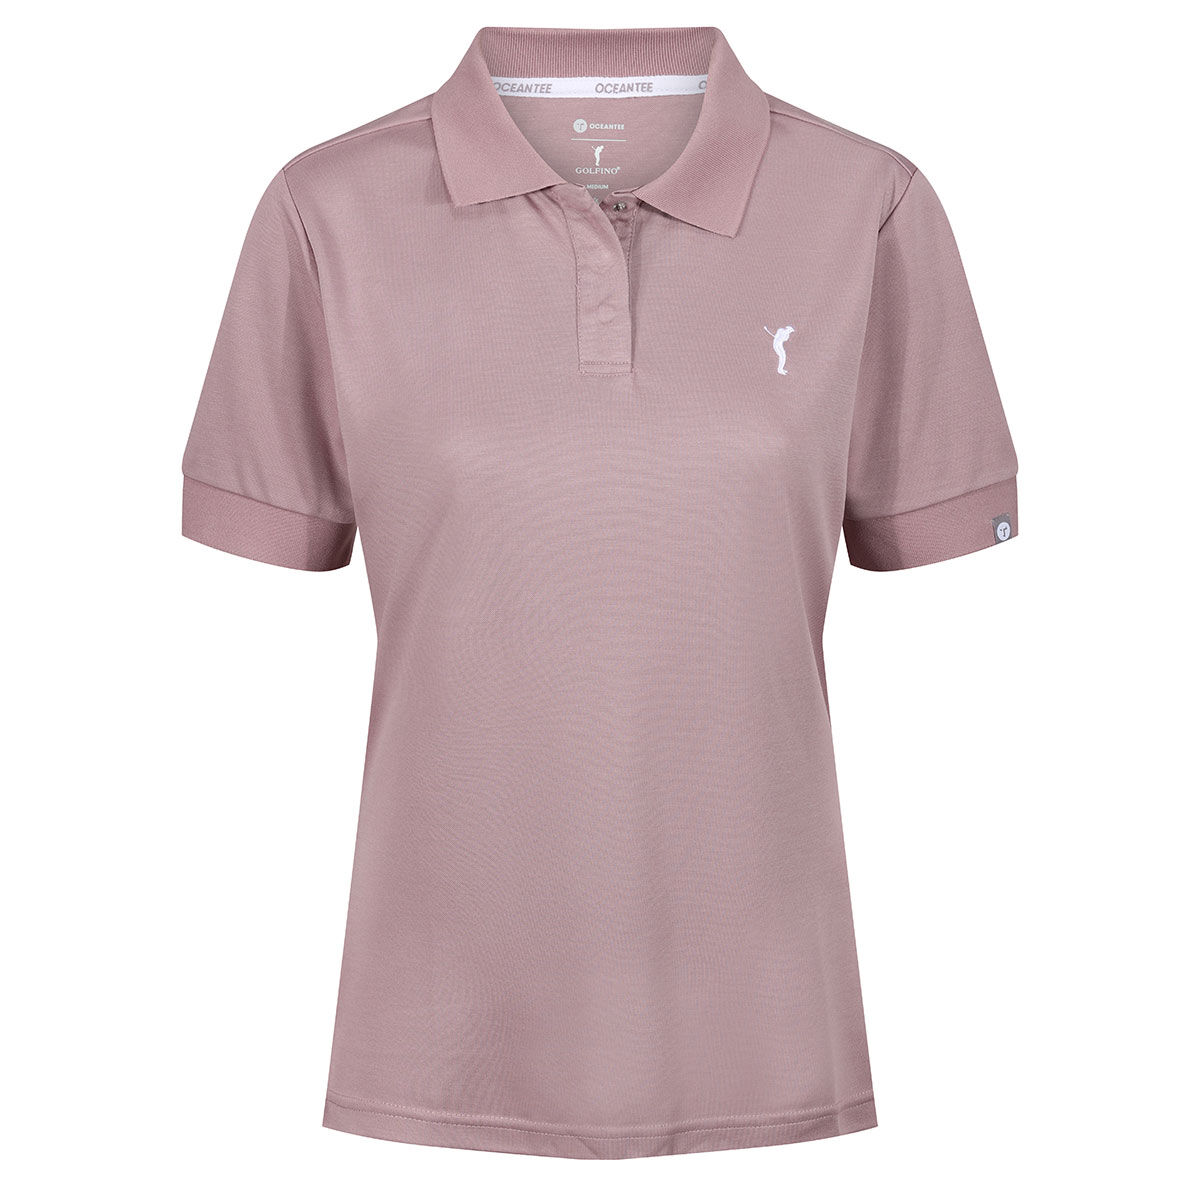 Ocean Tee Women’s Pink Embroidered GOLFINO Wave Golf Polo Shirt, Size: XS | American Golf